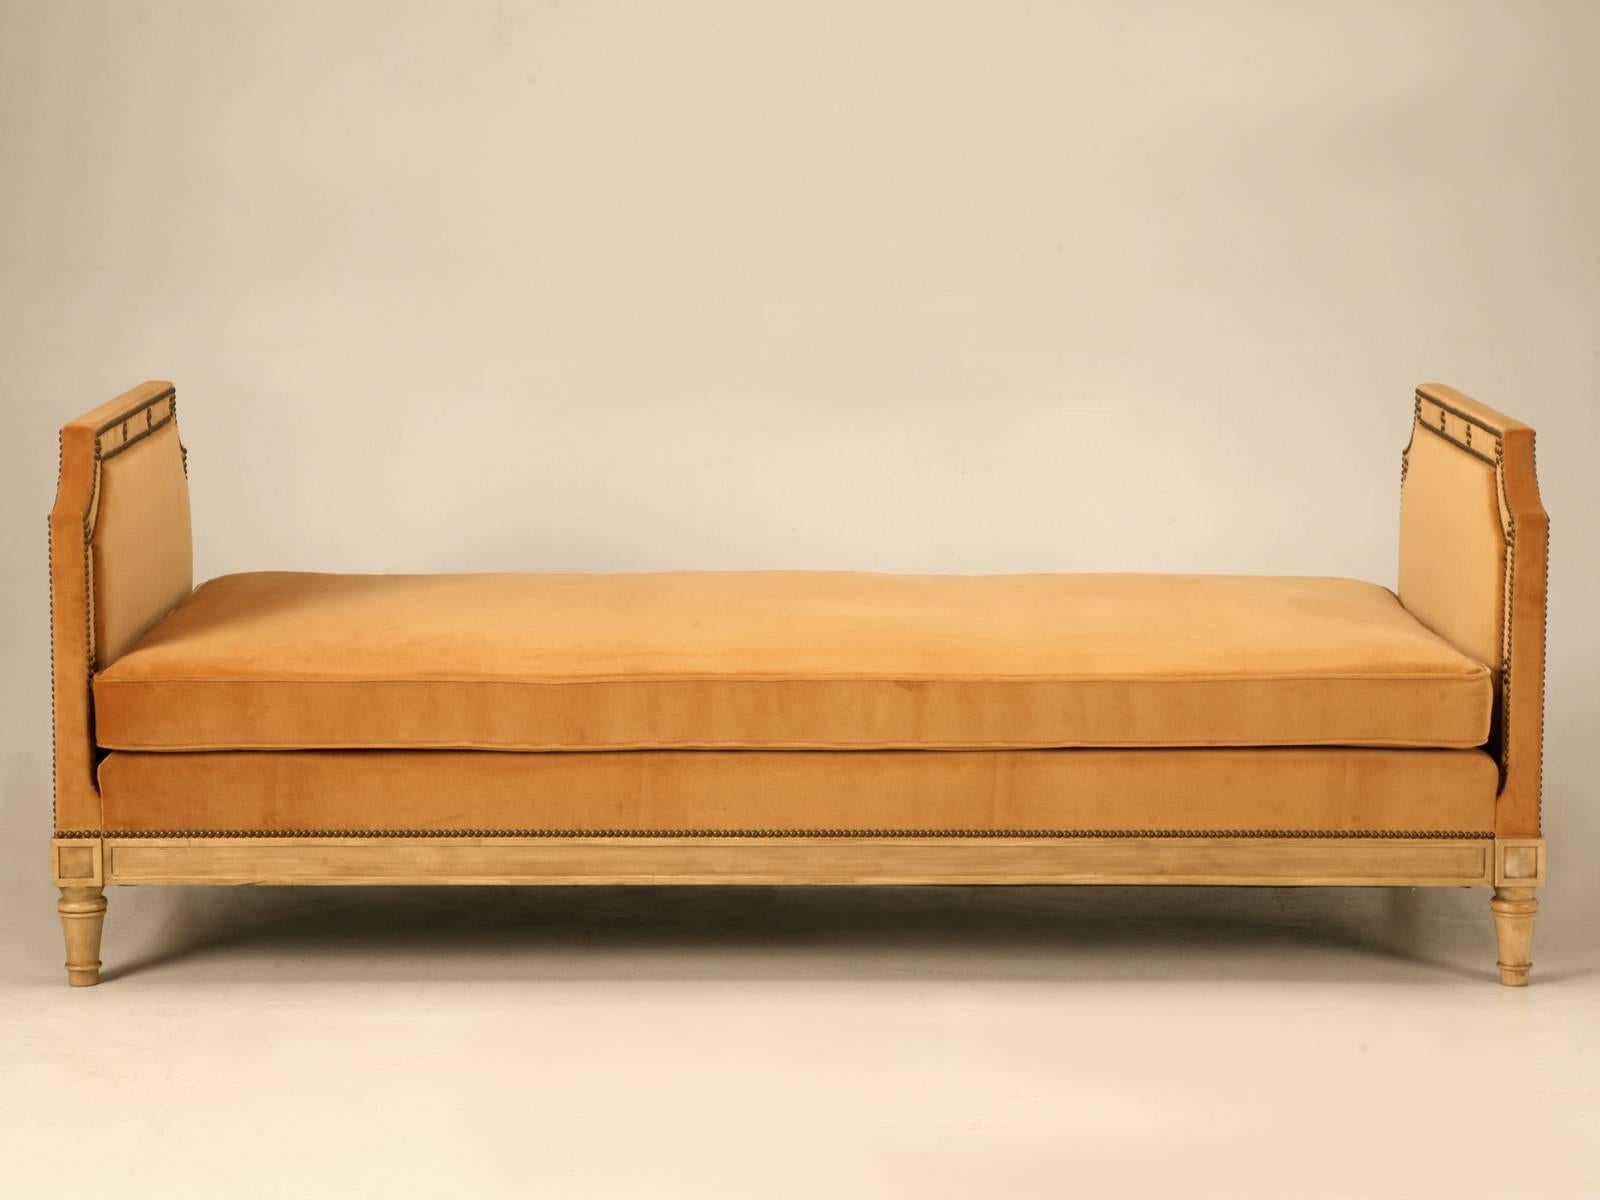 Our old plank workshop, offers this French inspired daybed in any dimension, up to a king-size bed and of course it can be COM. The frames are typically made from solid maple, although you can spec your choice of wood and finishes. Nails likewise